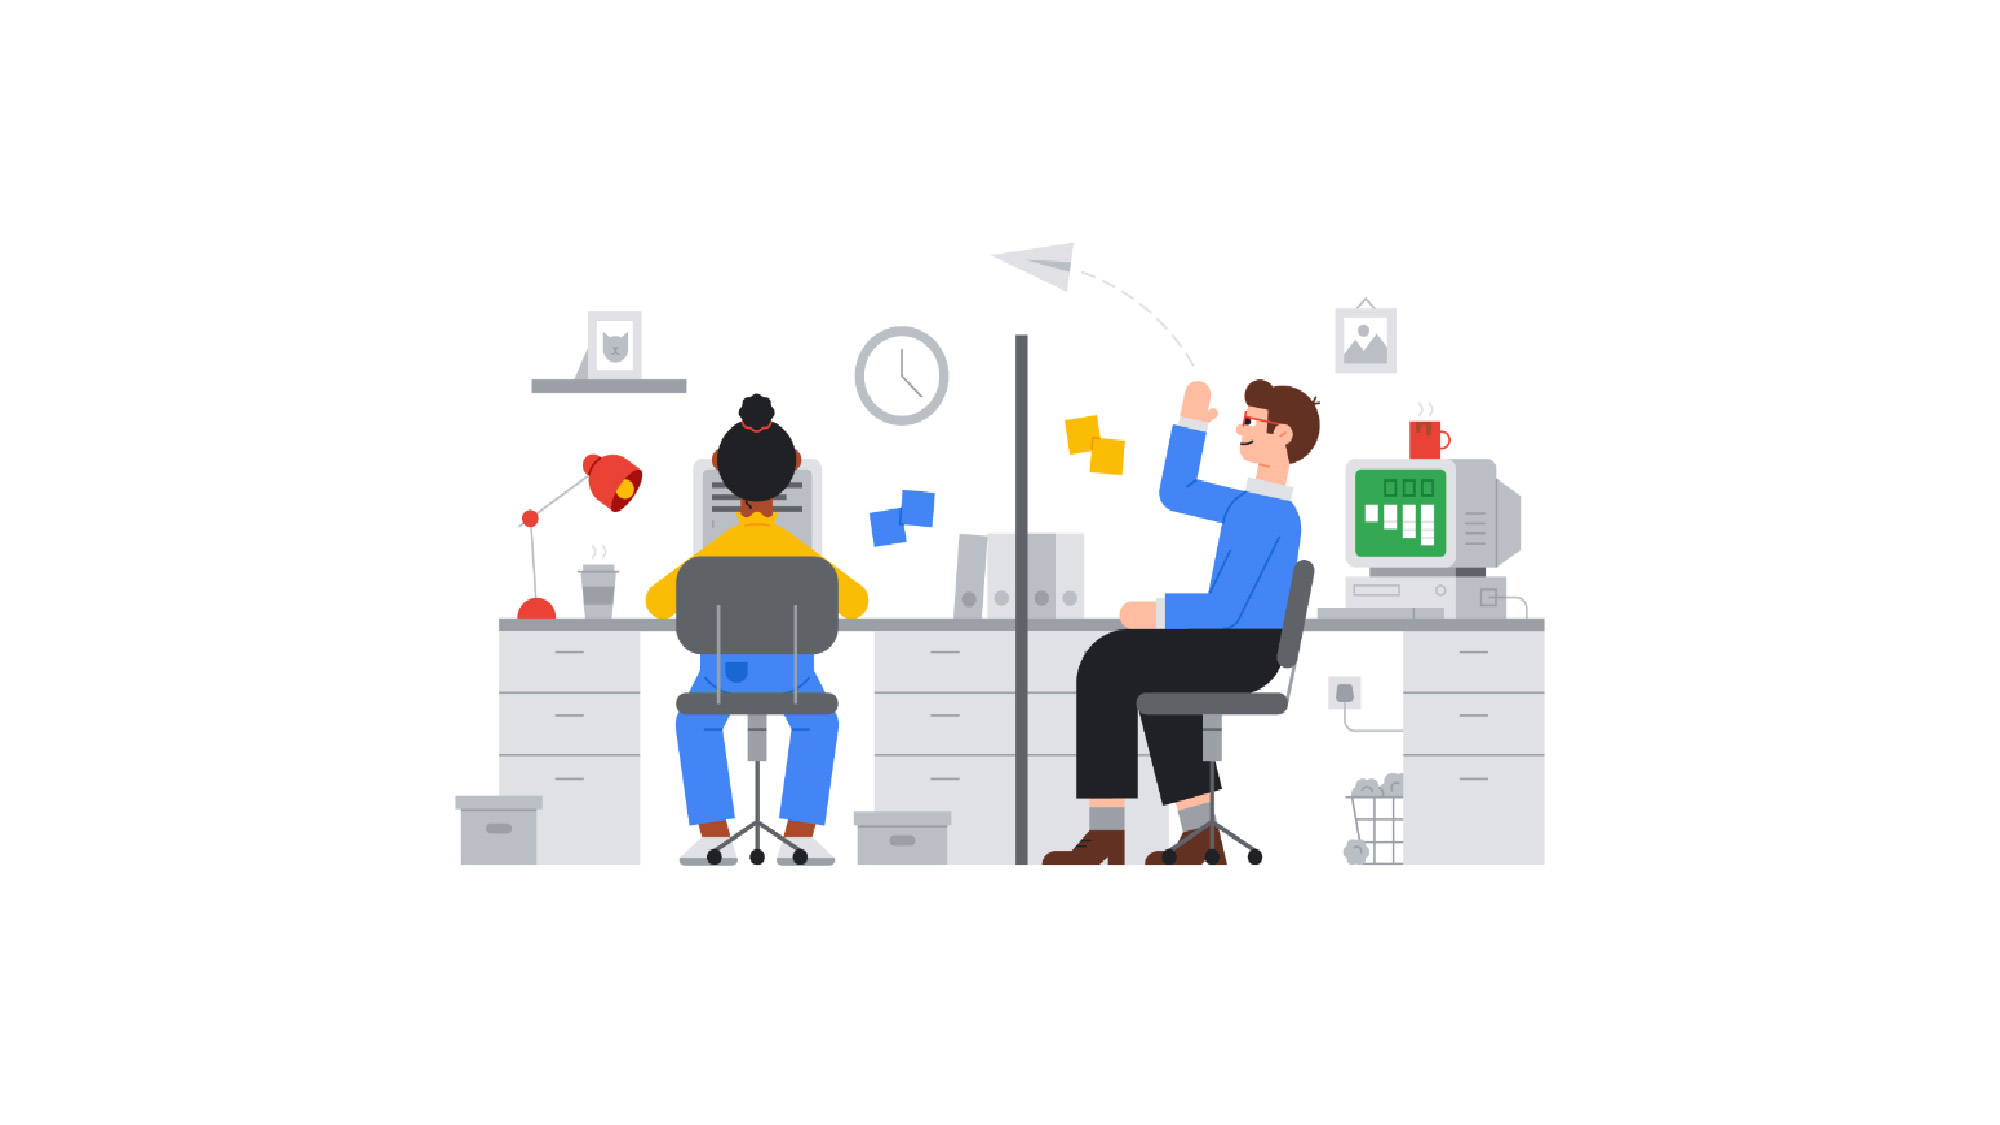 Google graphic illustration of two people working at desks